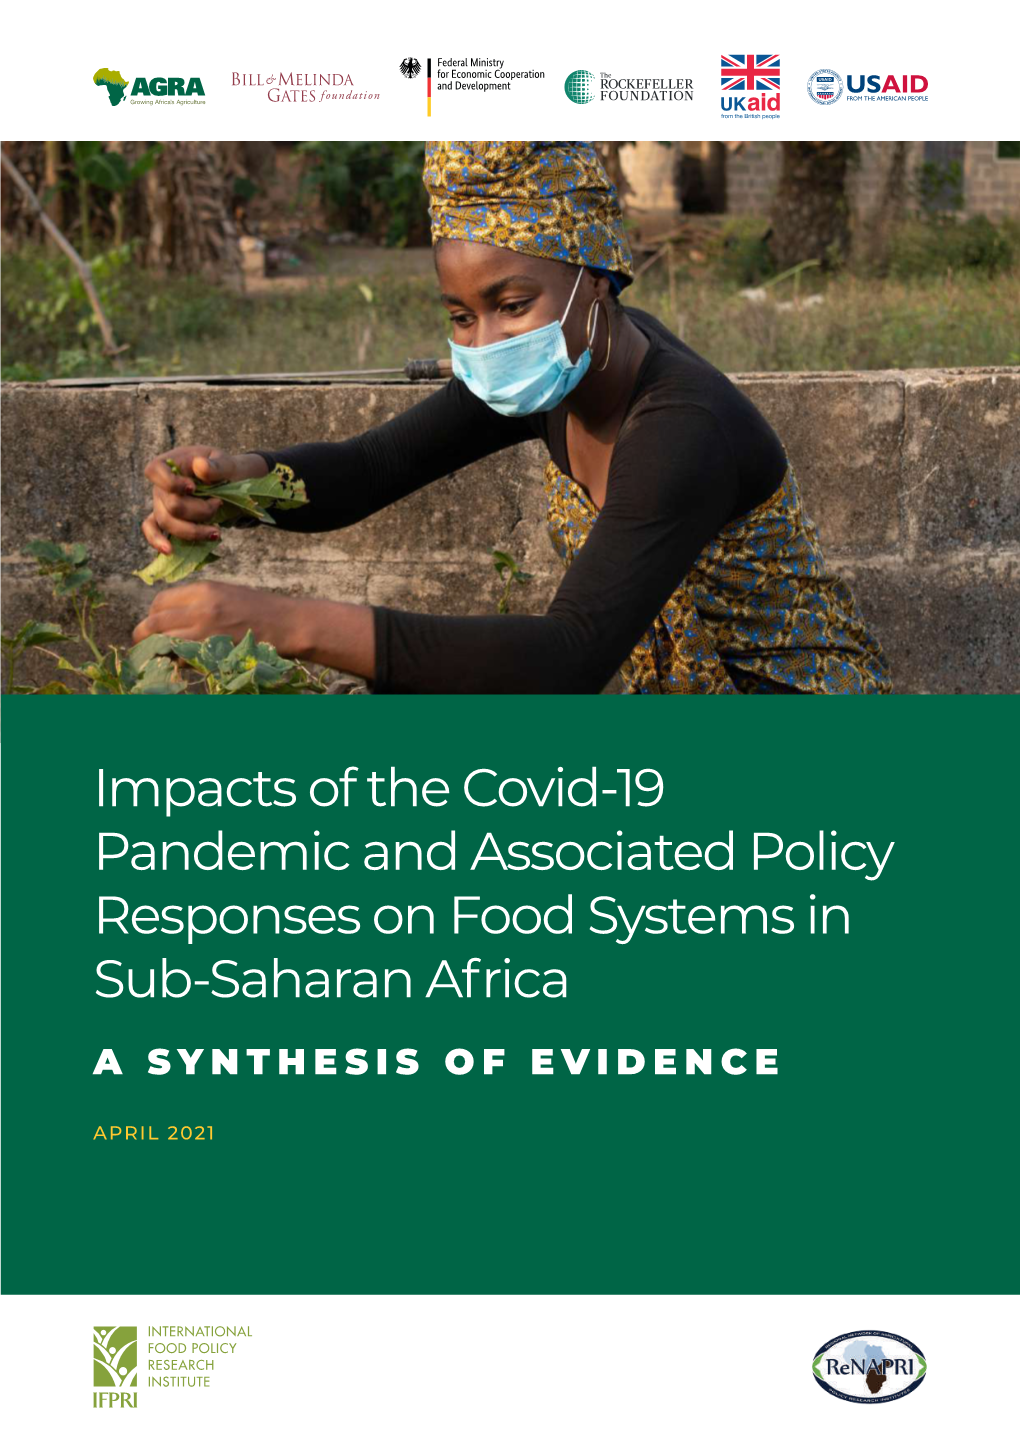 Covid-19 Impacts on Food Systems in SSA